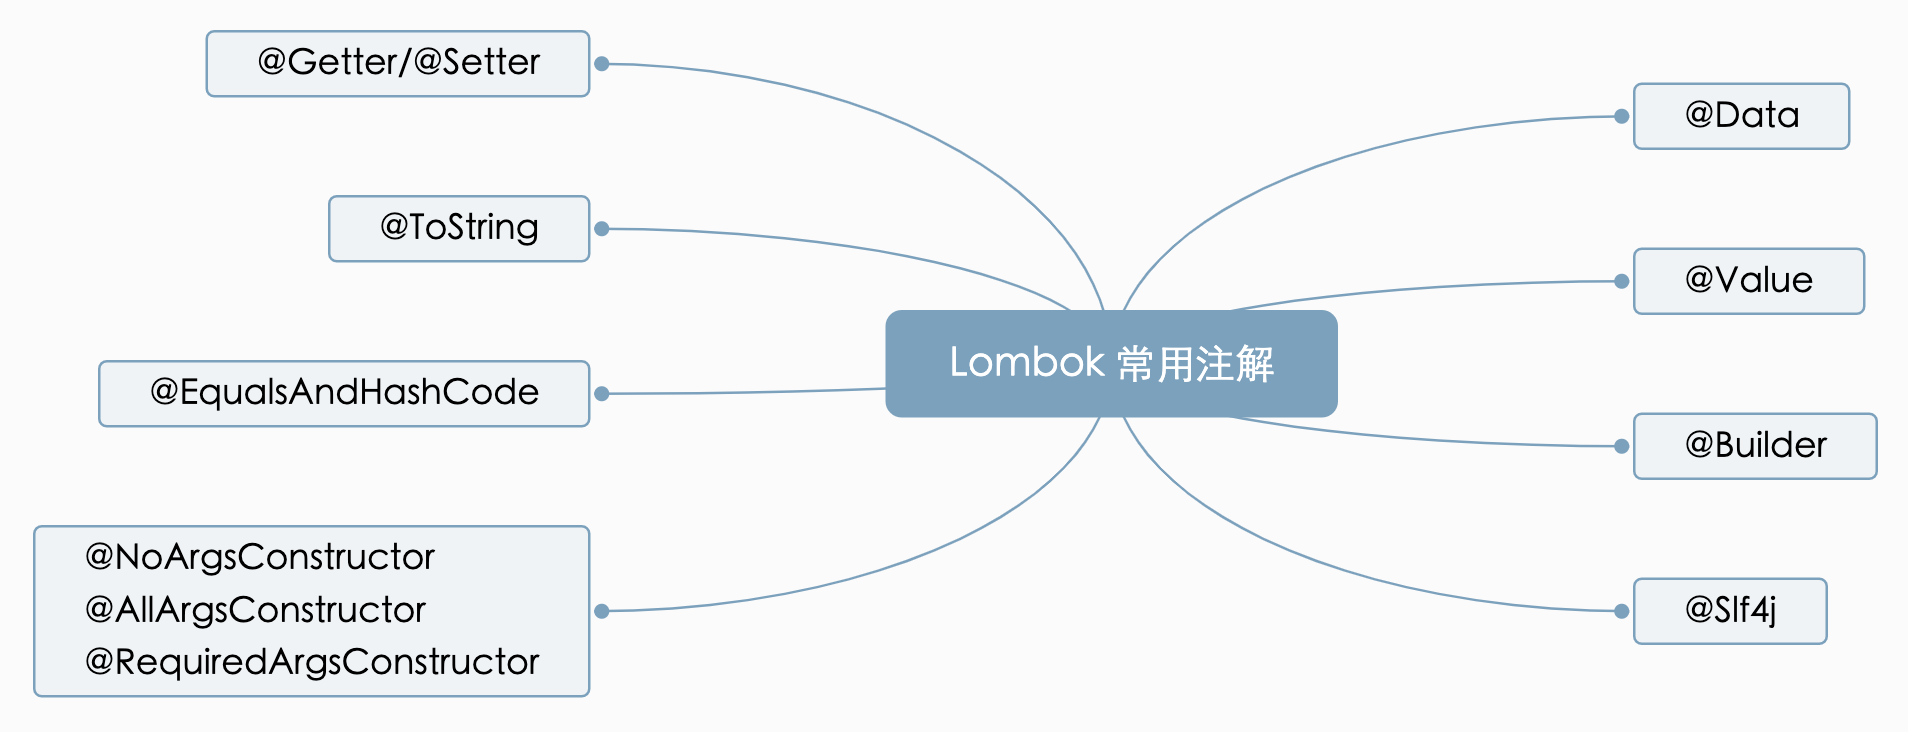 lombok_overview.png